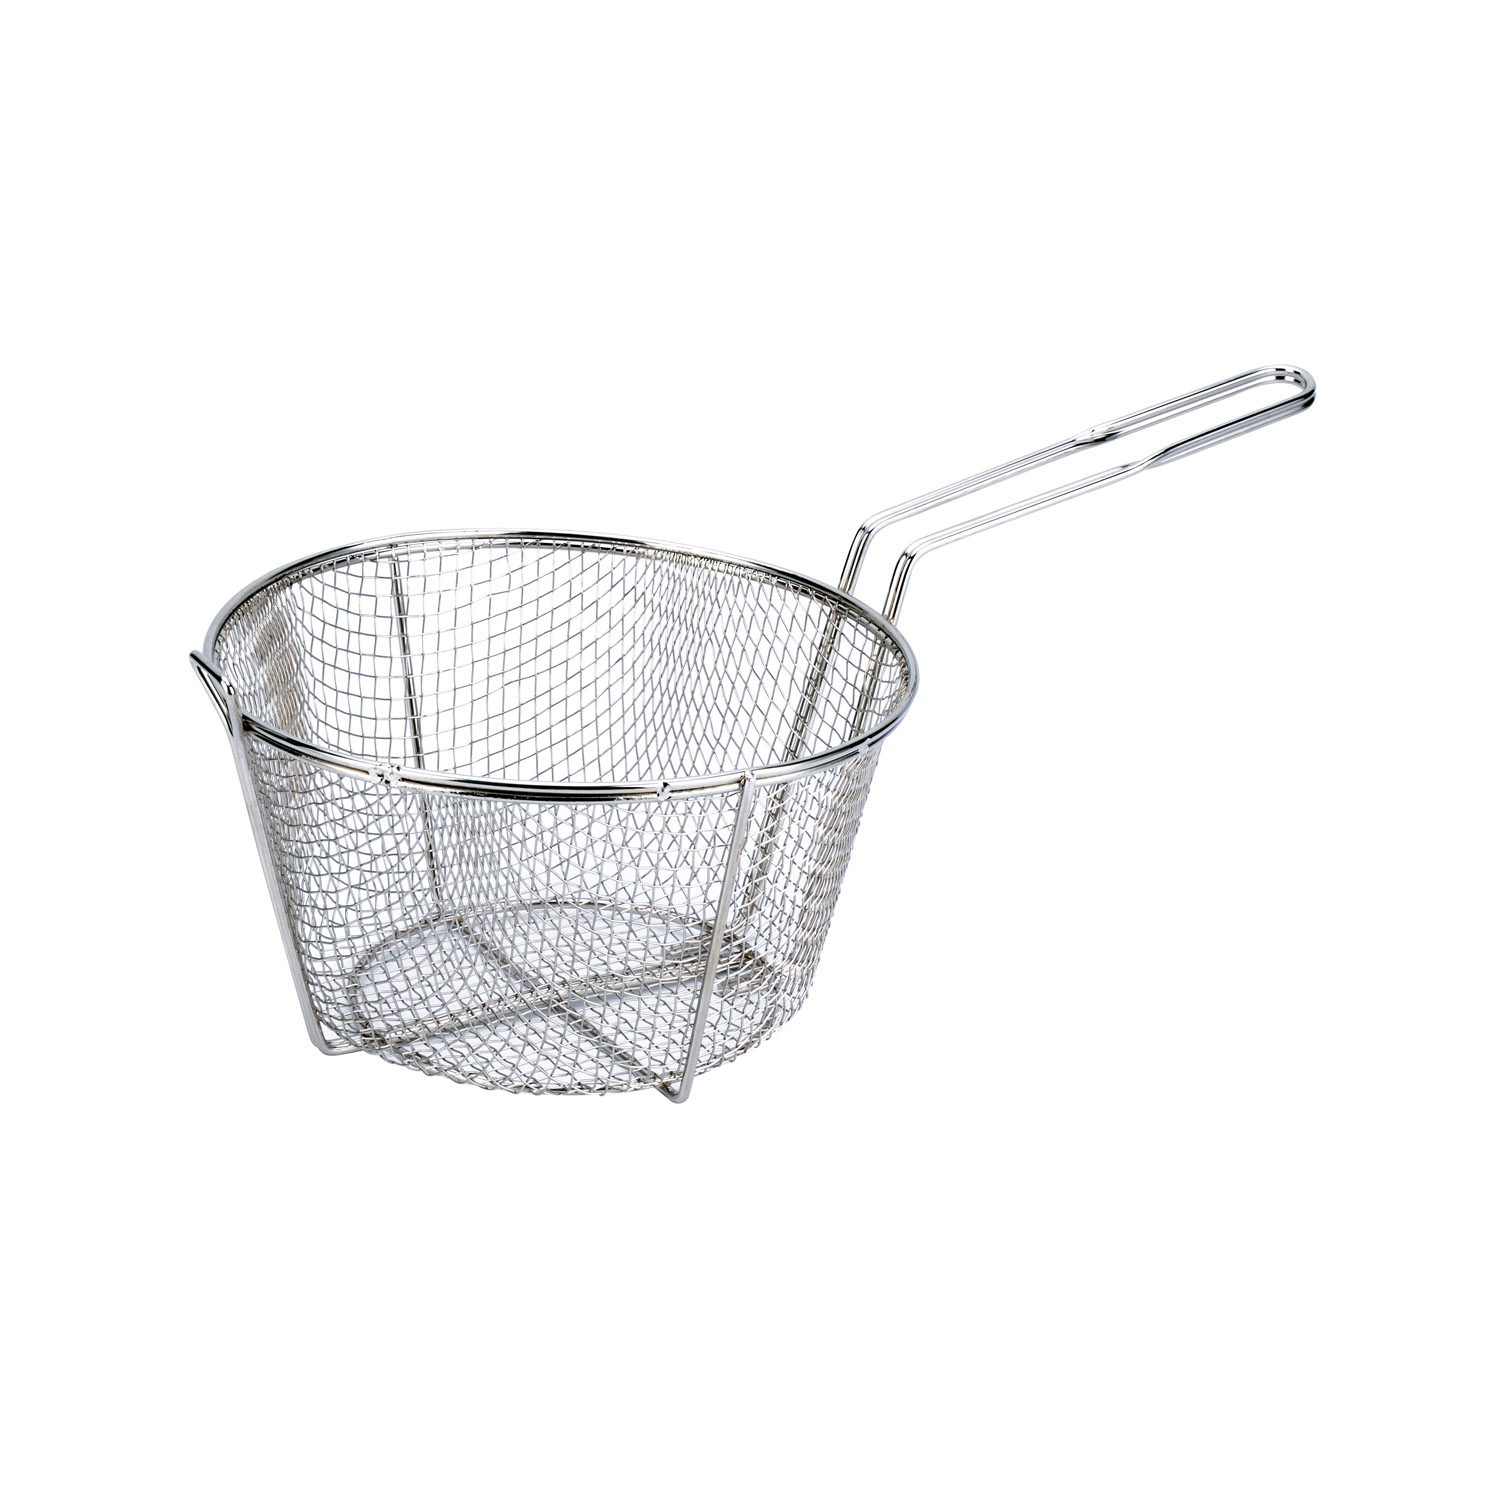 CAC China FBR4-11 Nickel-Plated Fry Basket, 1/4" Mesh Wire 11-1/2"Dia